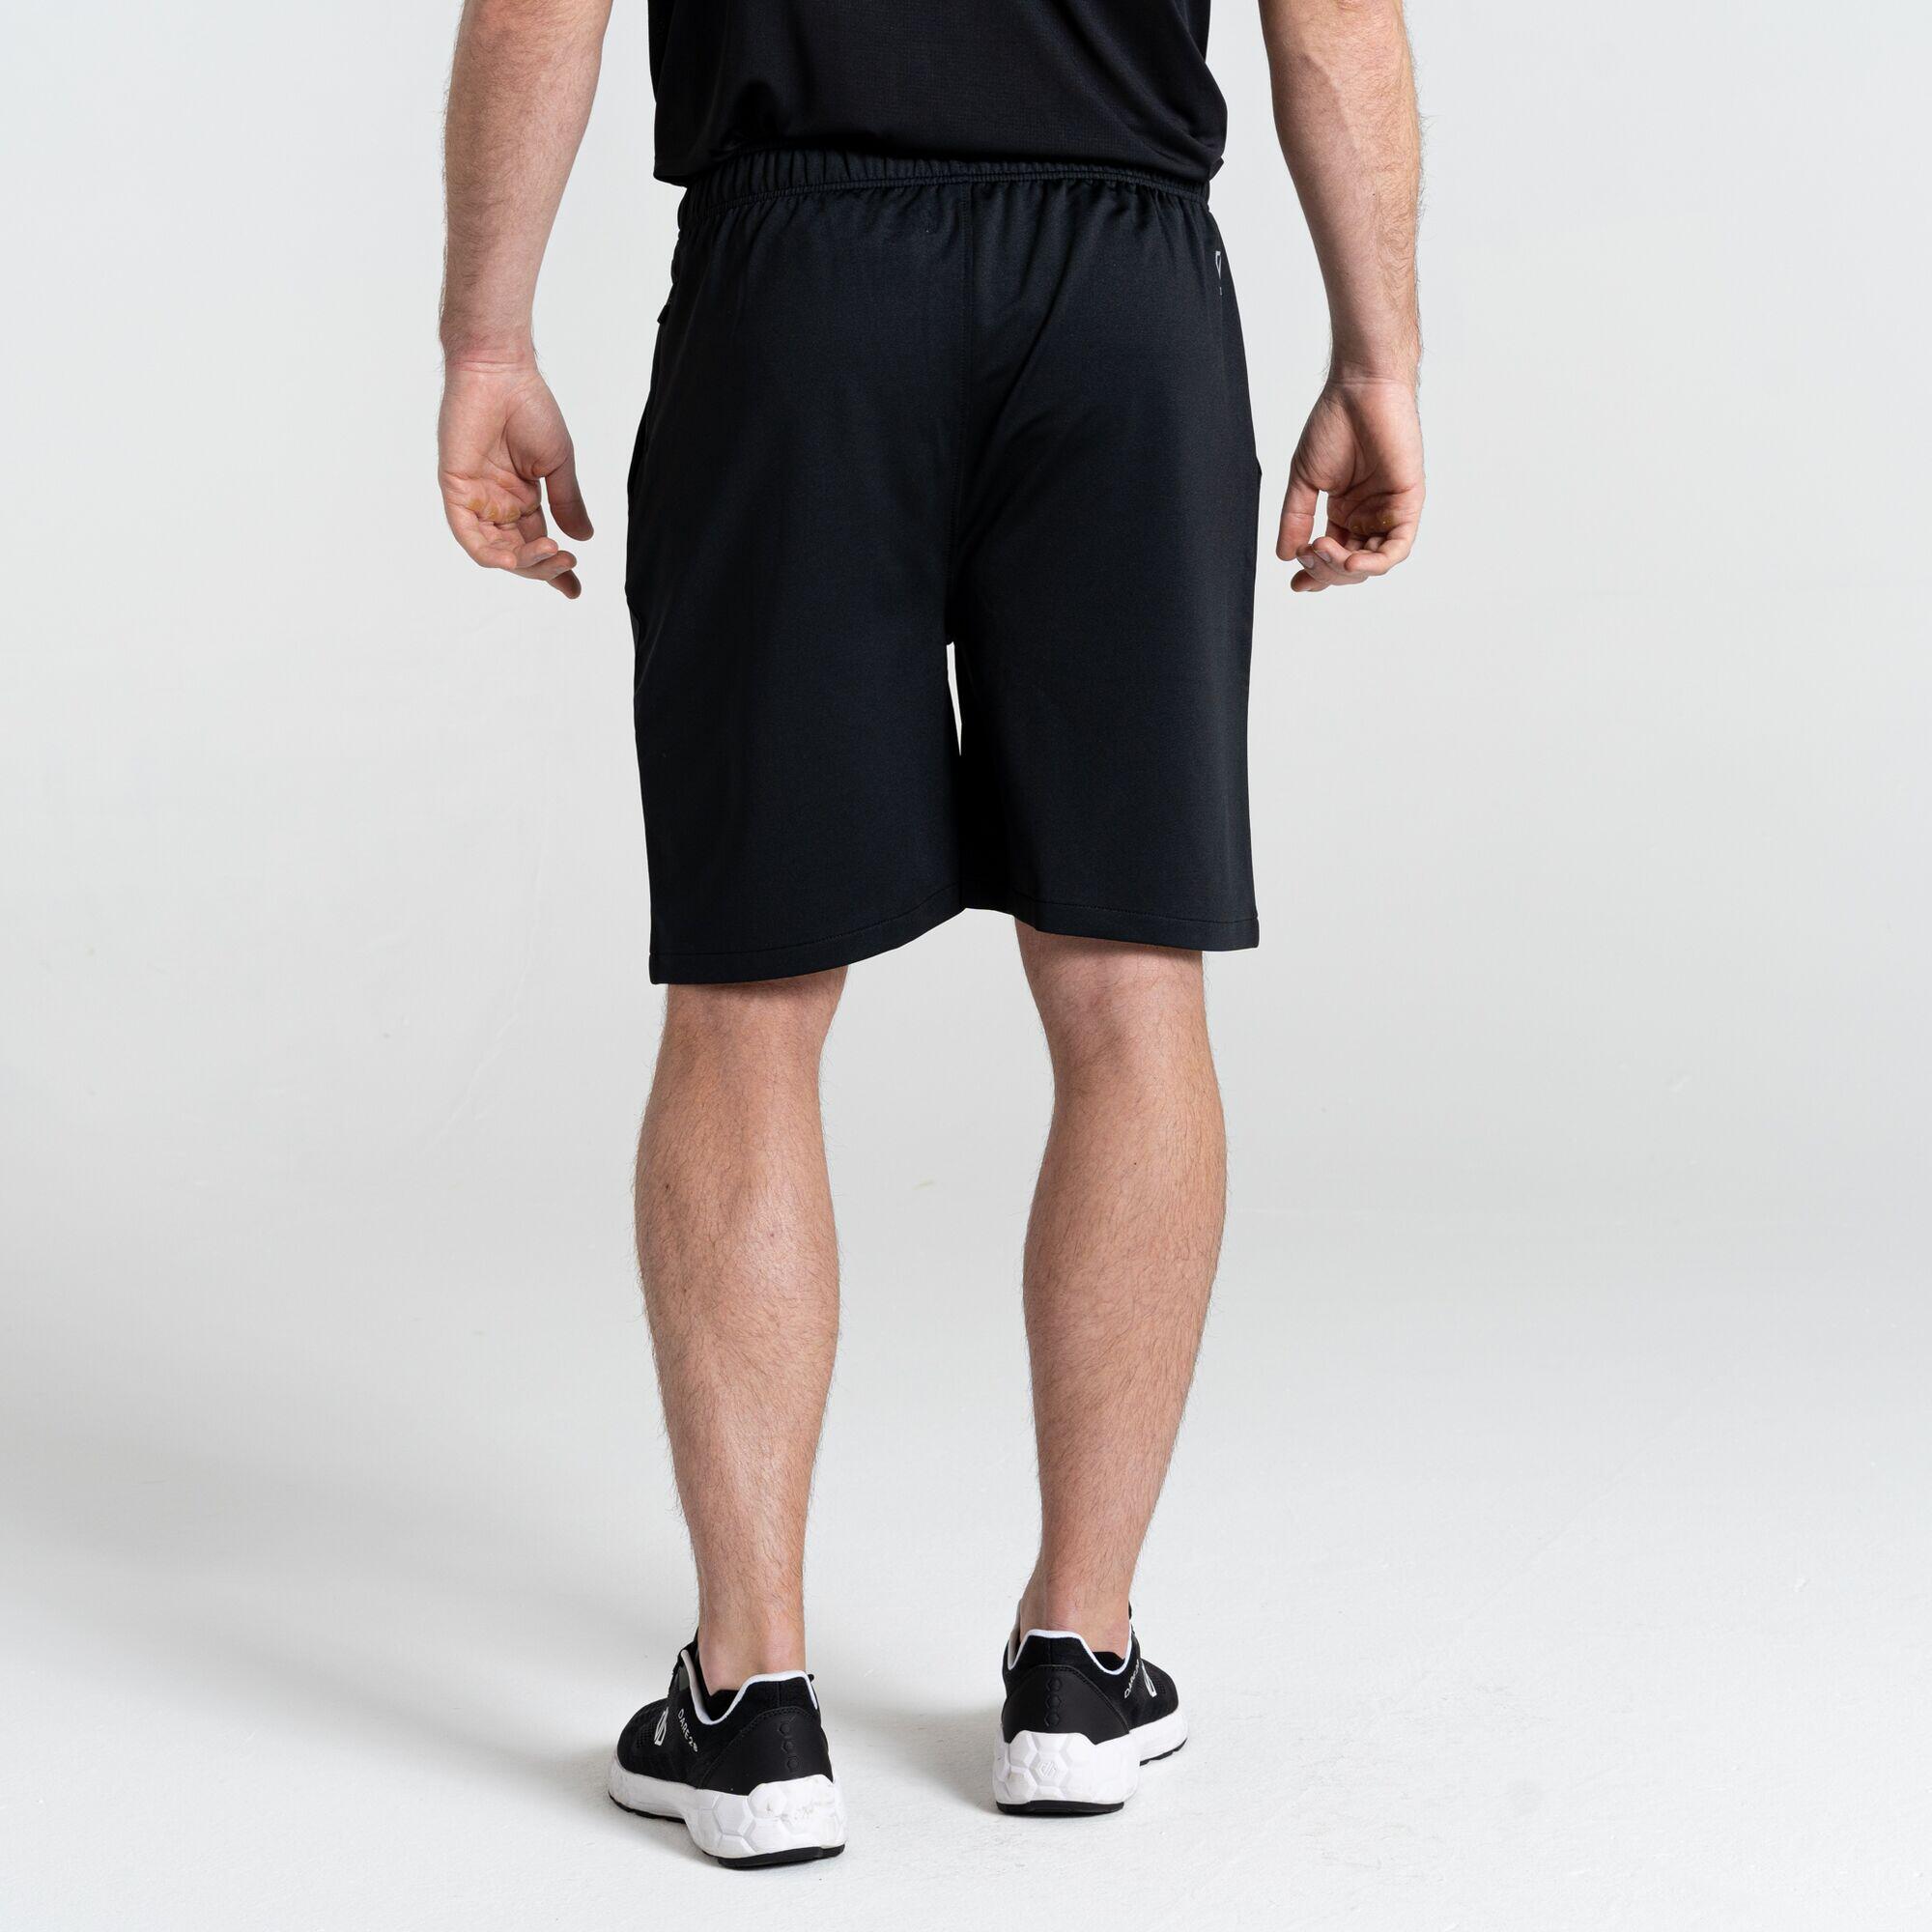 Sprinted Men's Fitness Fitness Shorts 3/5